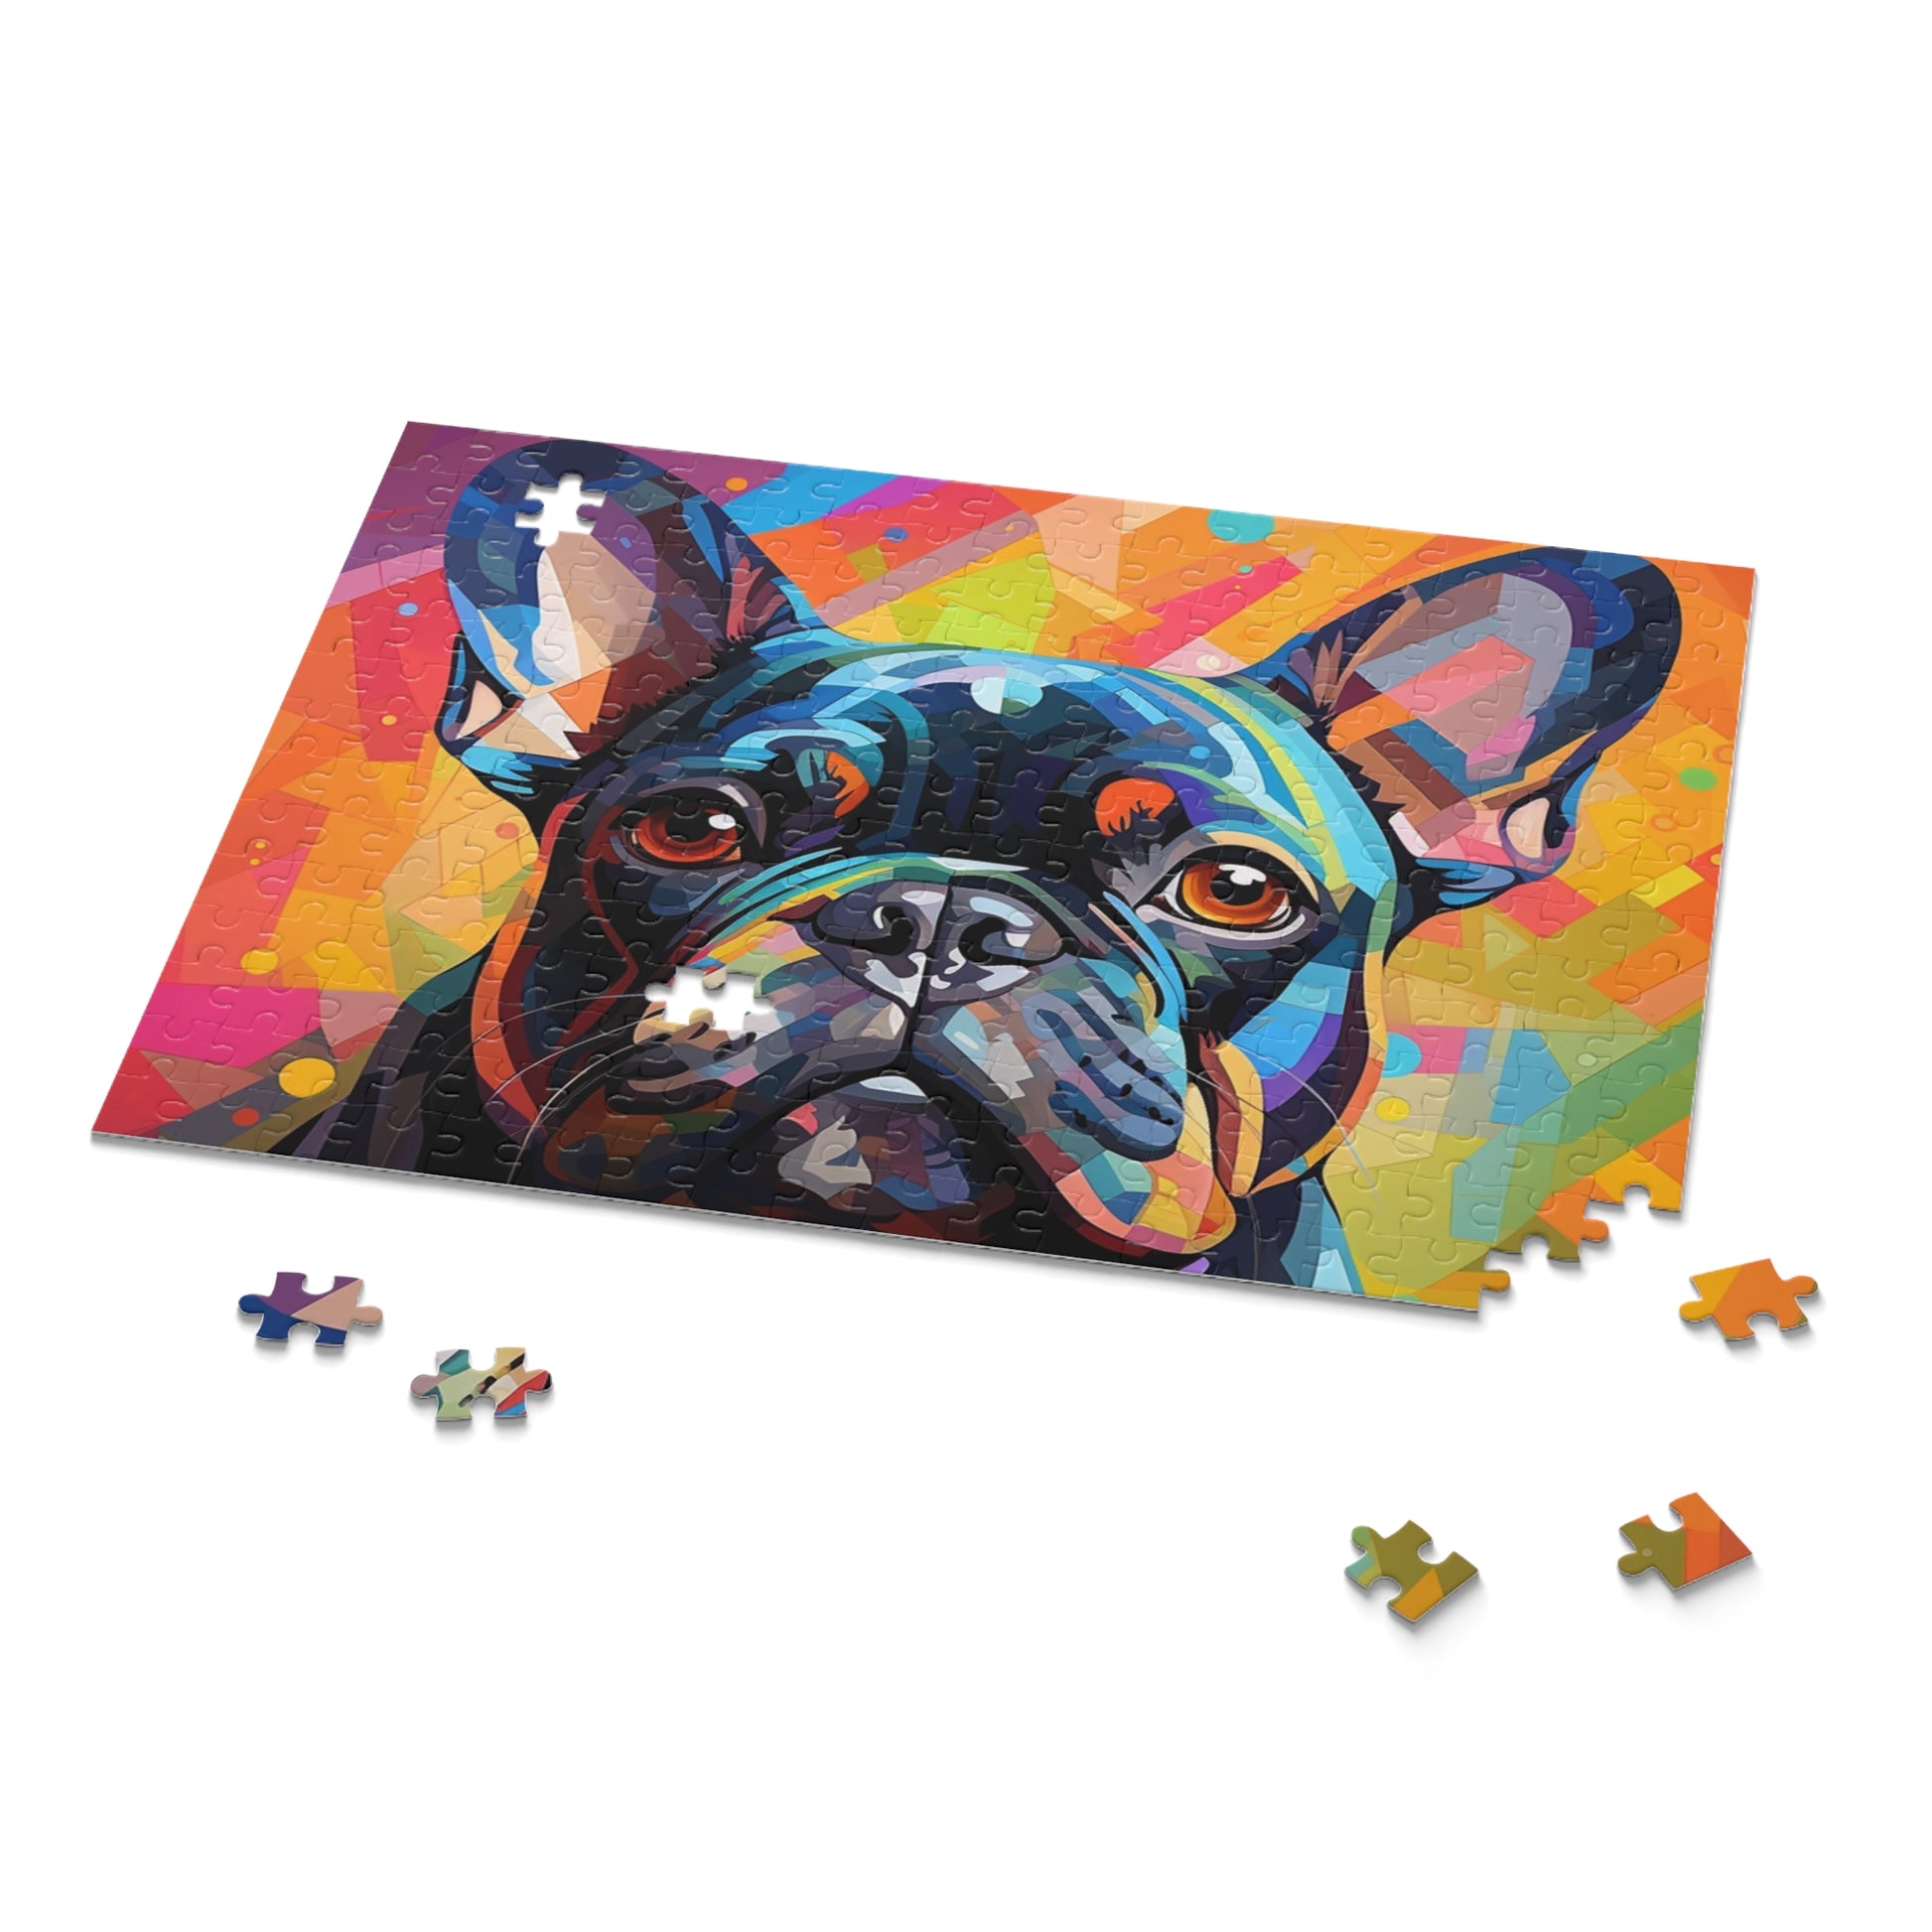 Abstract Frenchie Oil Paint Dog Jigsaw Puzzle Adult Birthday Business Jigsaw Puzzle Gift for Him Funny Humorous Indoor Outdoor Game Gift For Her Online-9